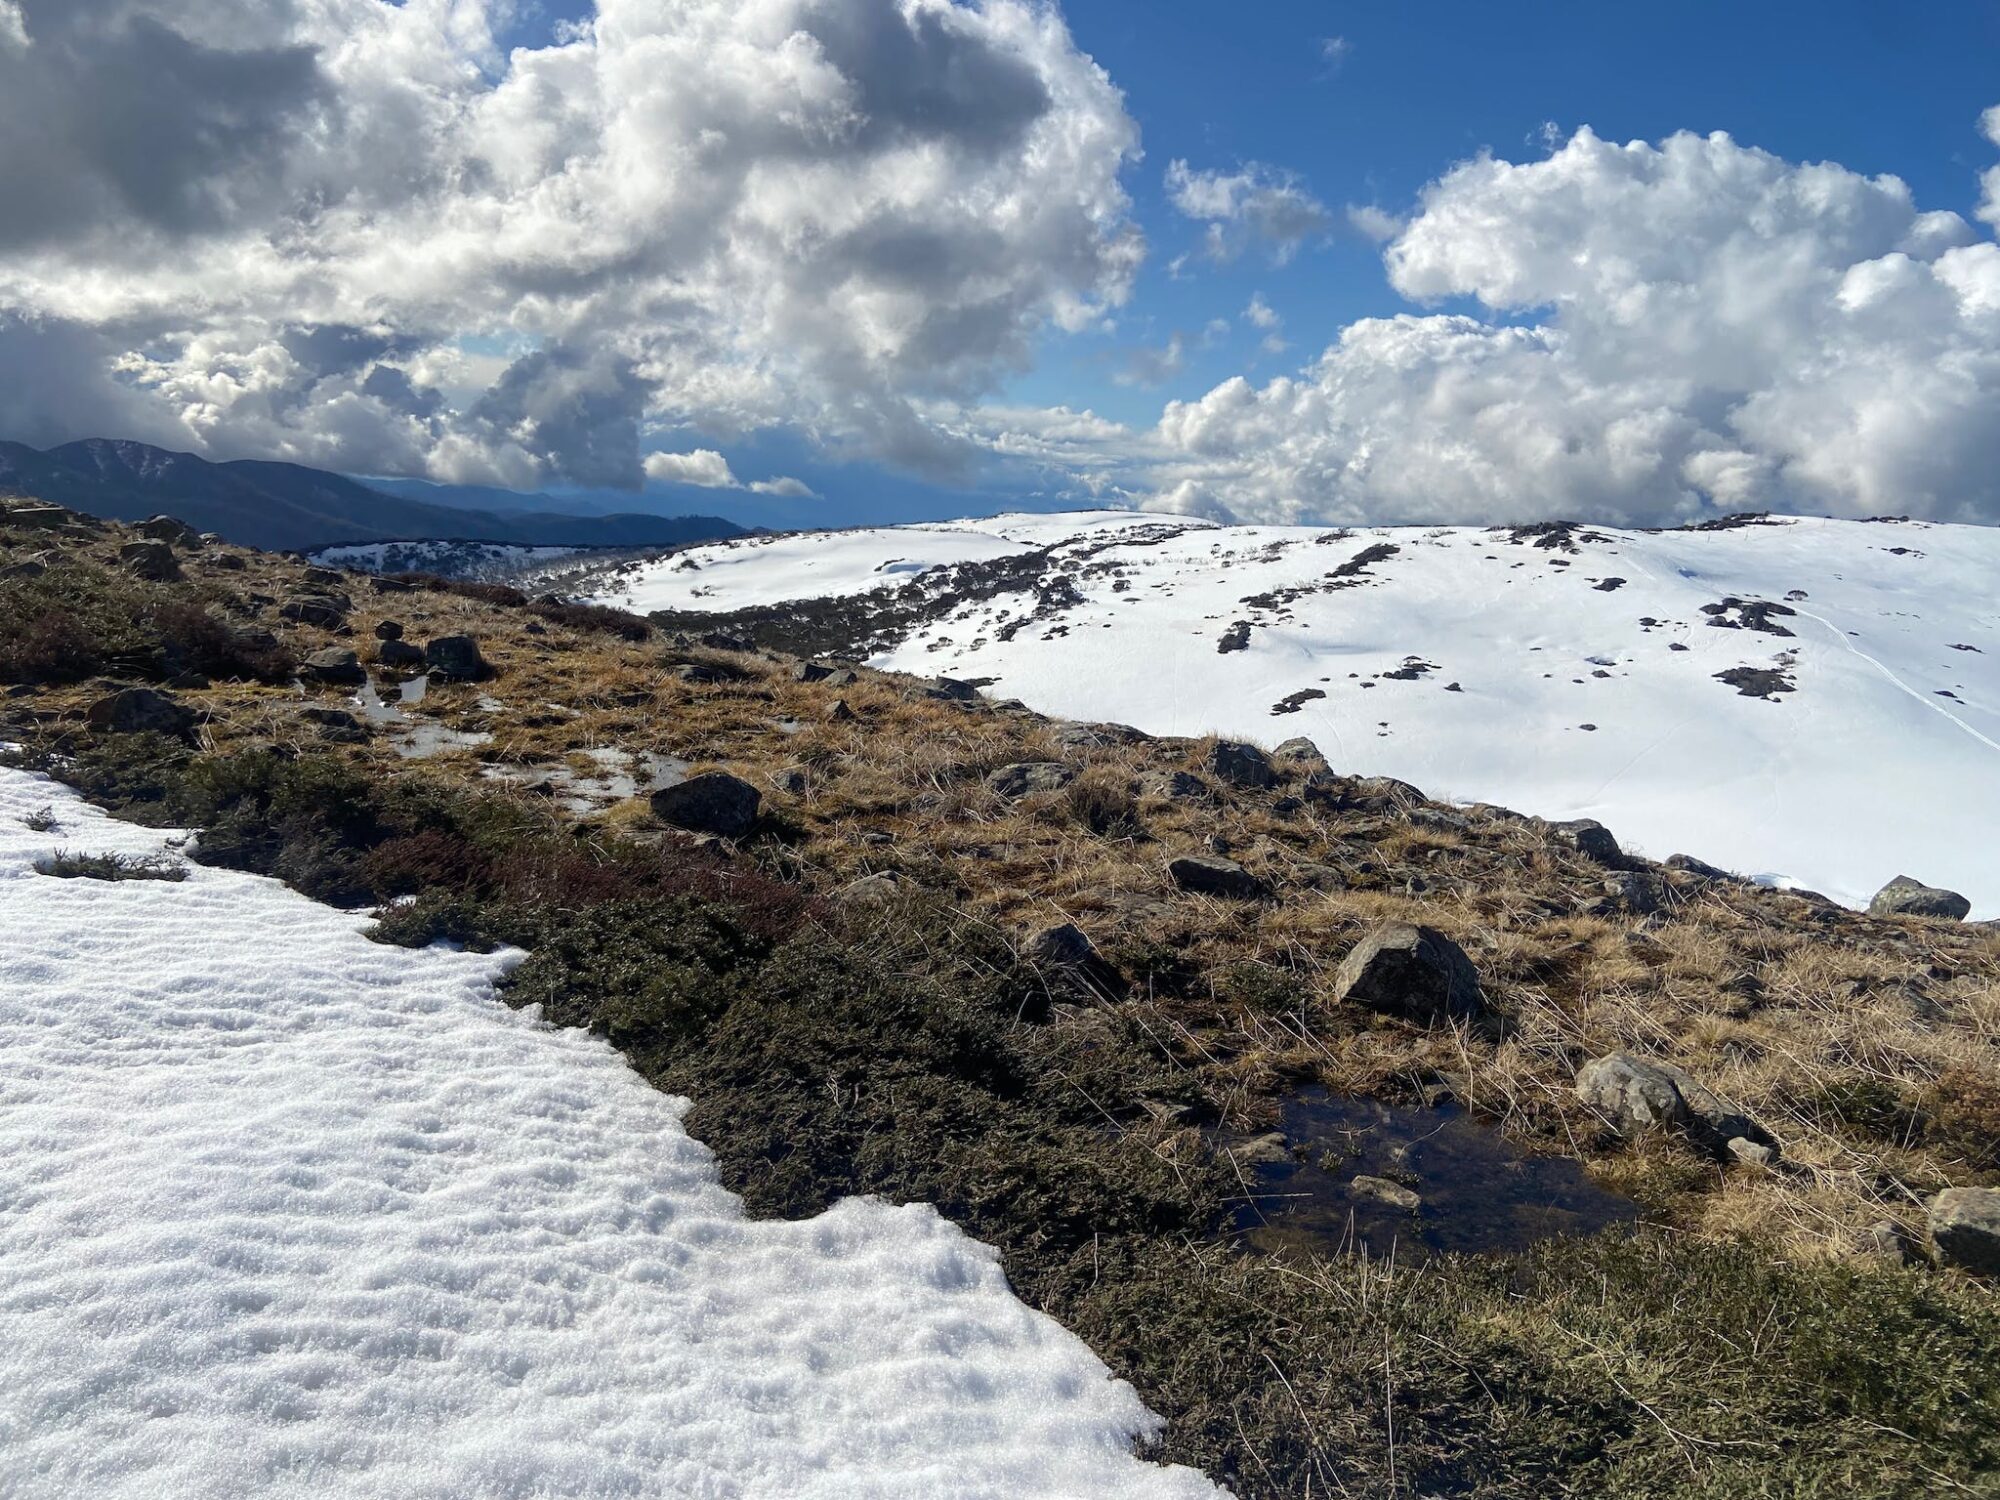 Rocky outcrops between late snow near Mount Mackay